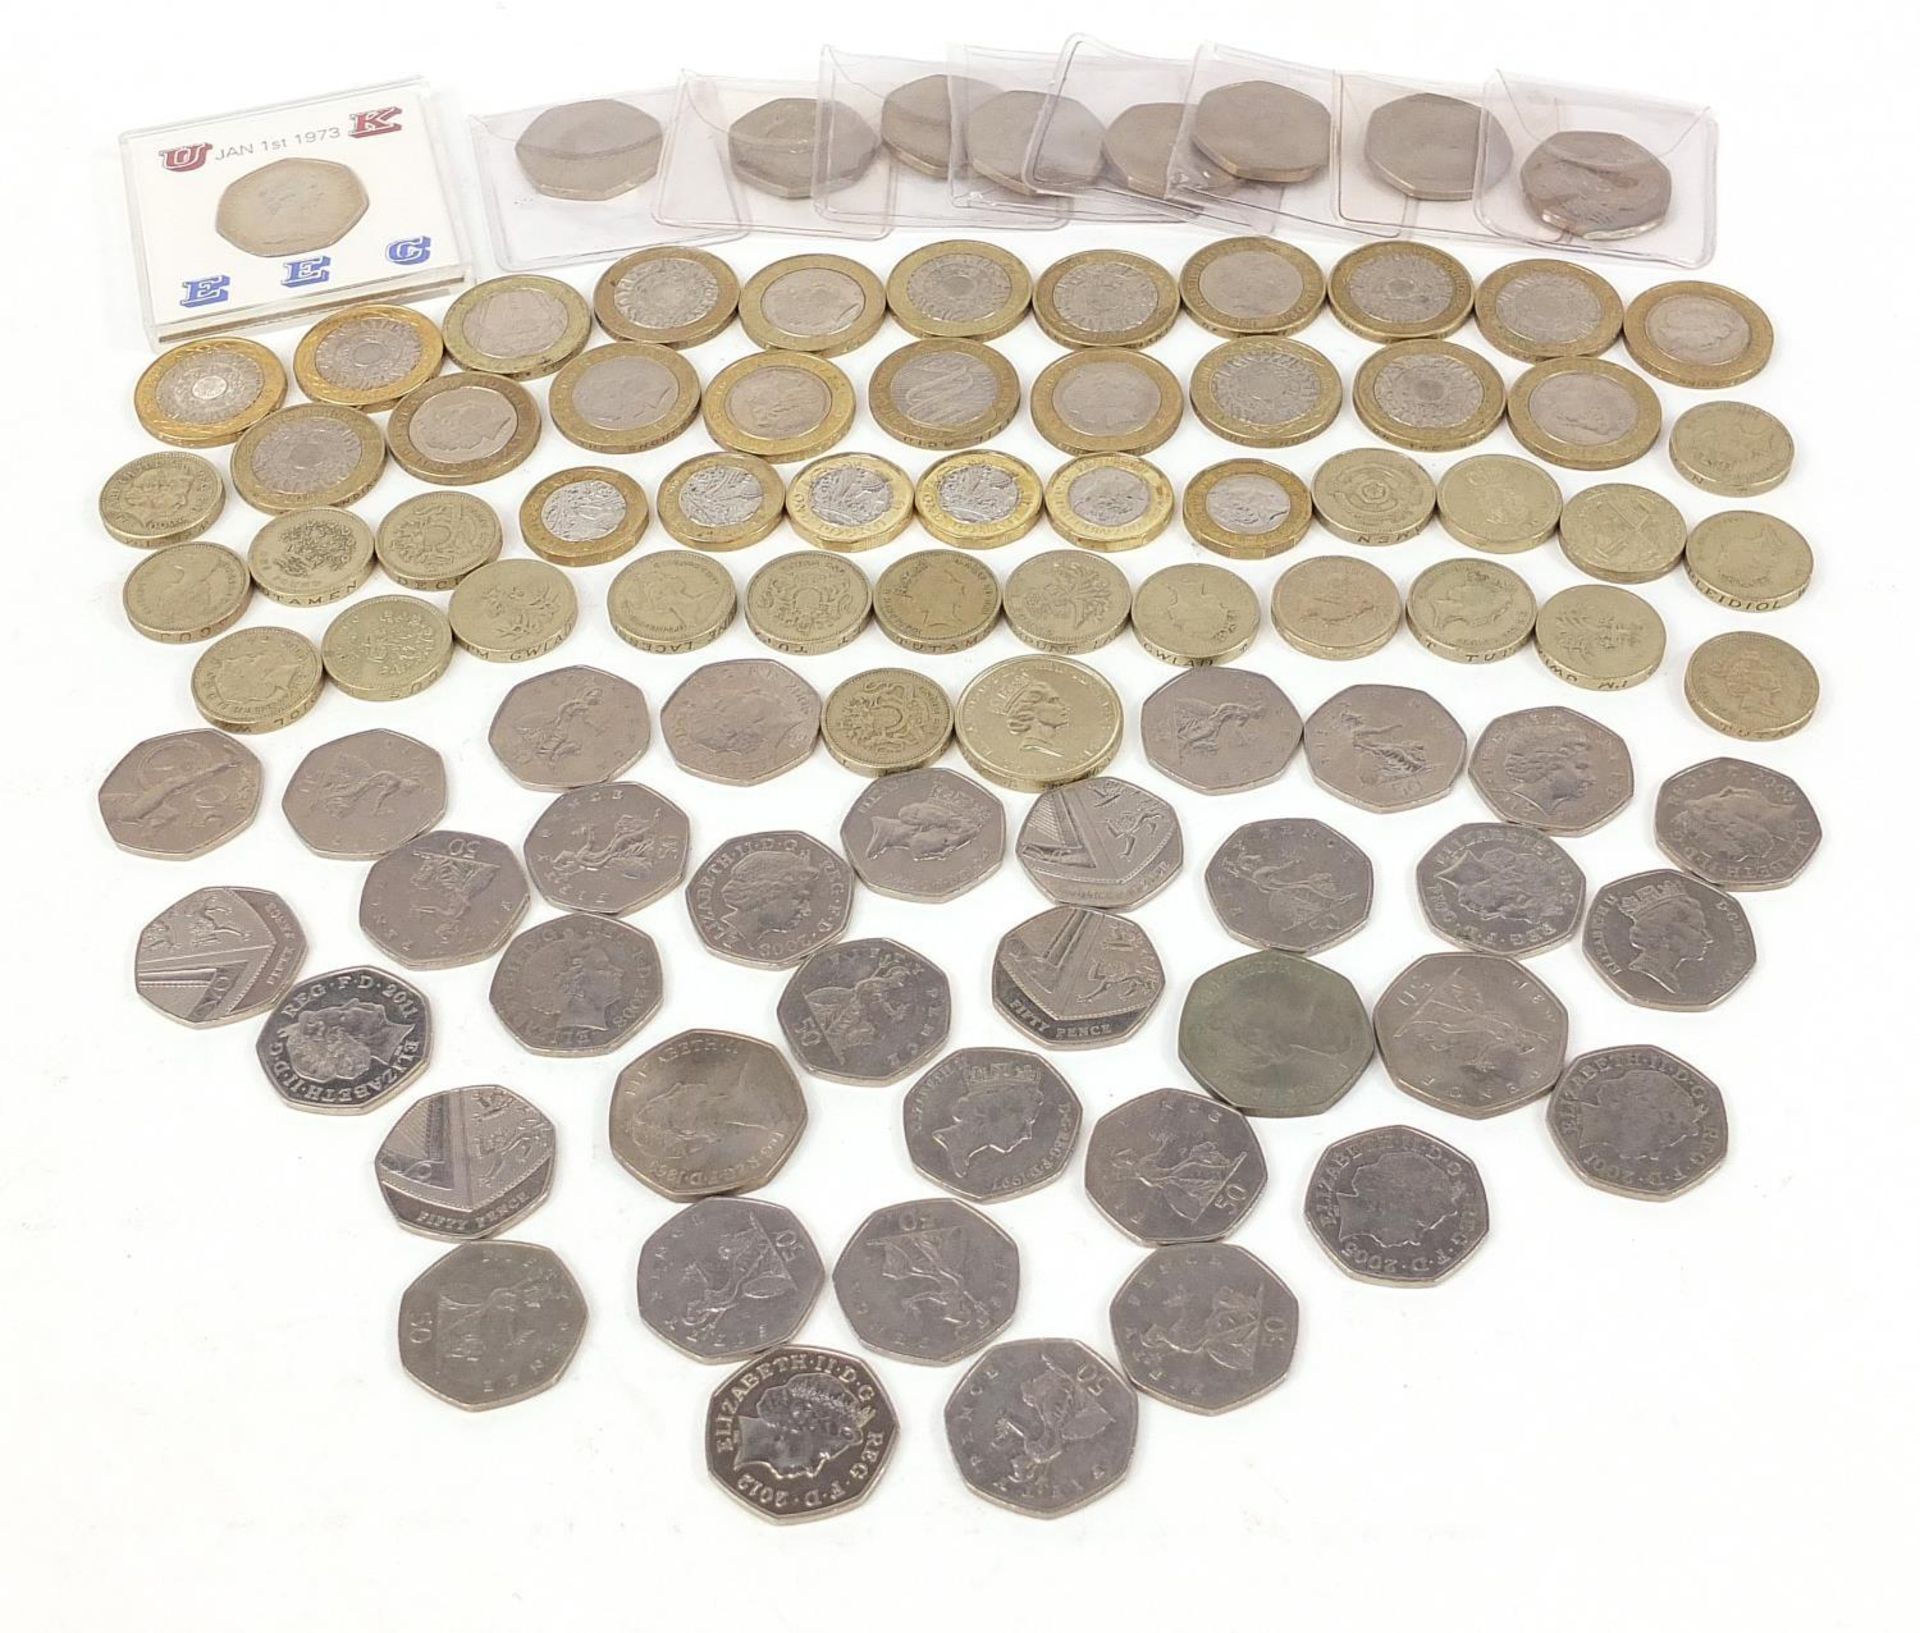 Collection of modern British coinage comprising two pounds, one pounds and fifty pence pieces